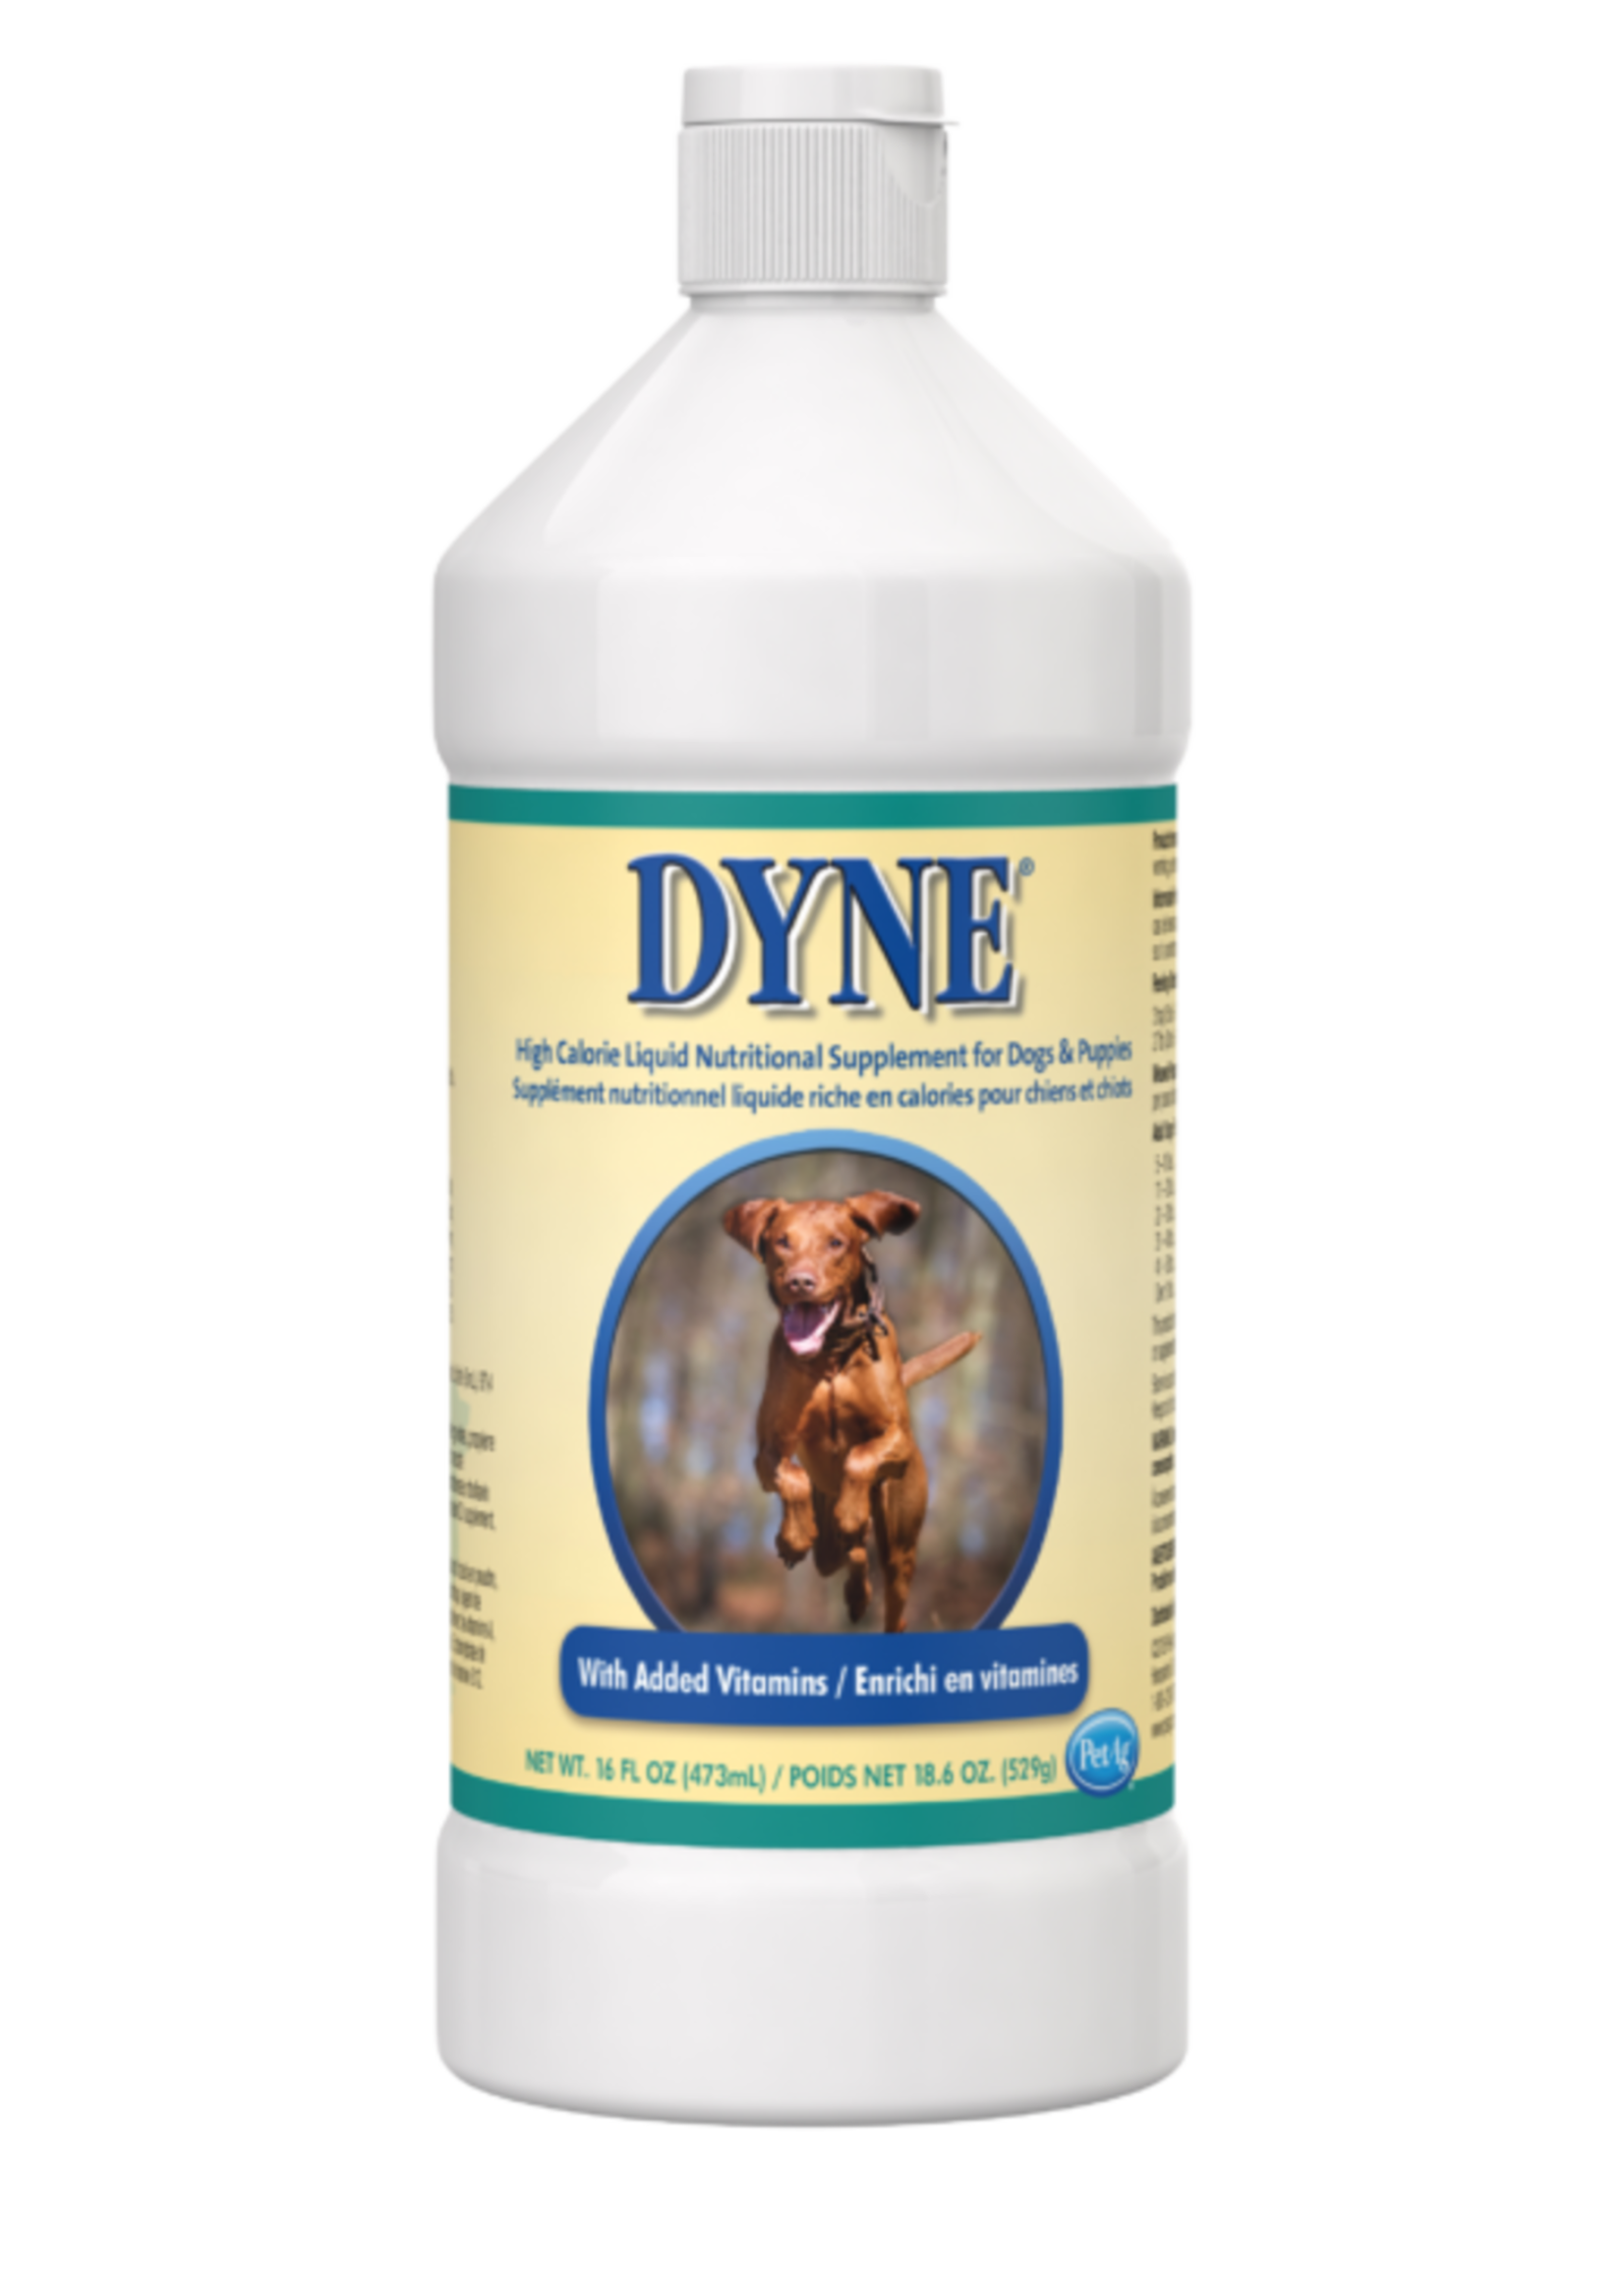 PET-AG Dyne High Calorie Liquid Nutritional Supplement for Dogs & Puppies 32 oz